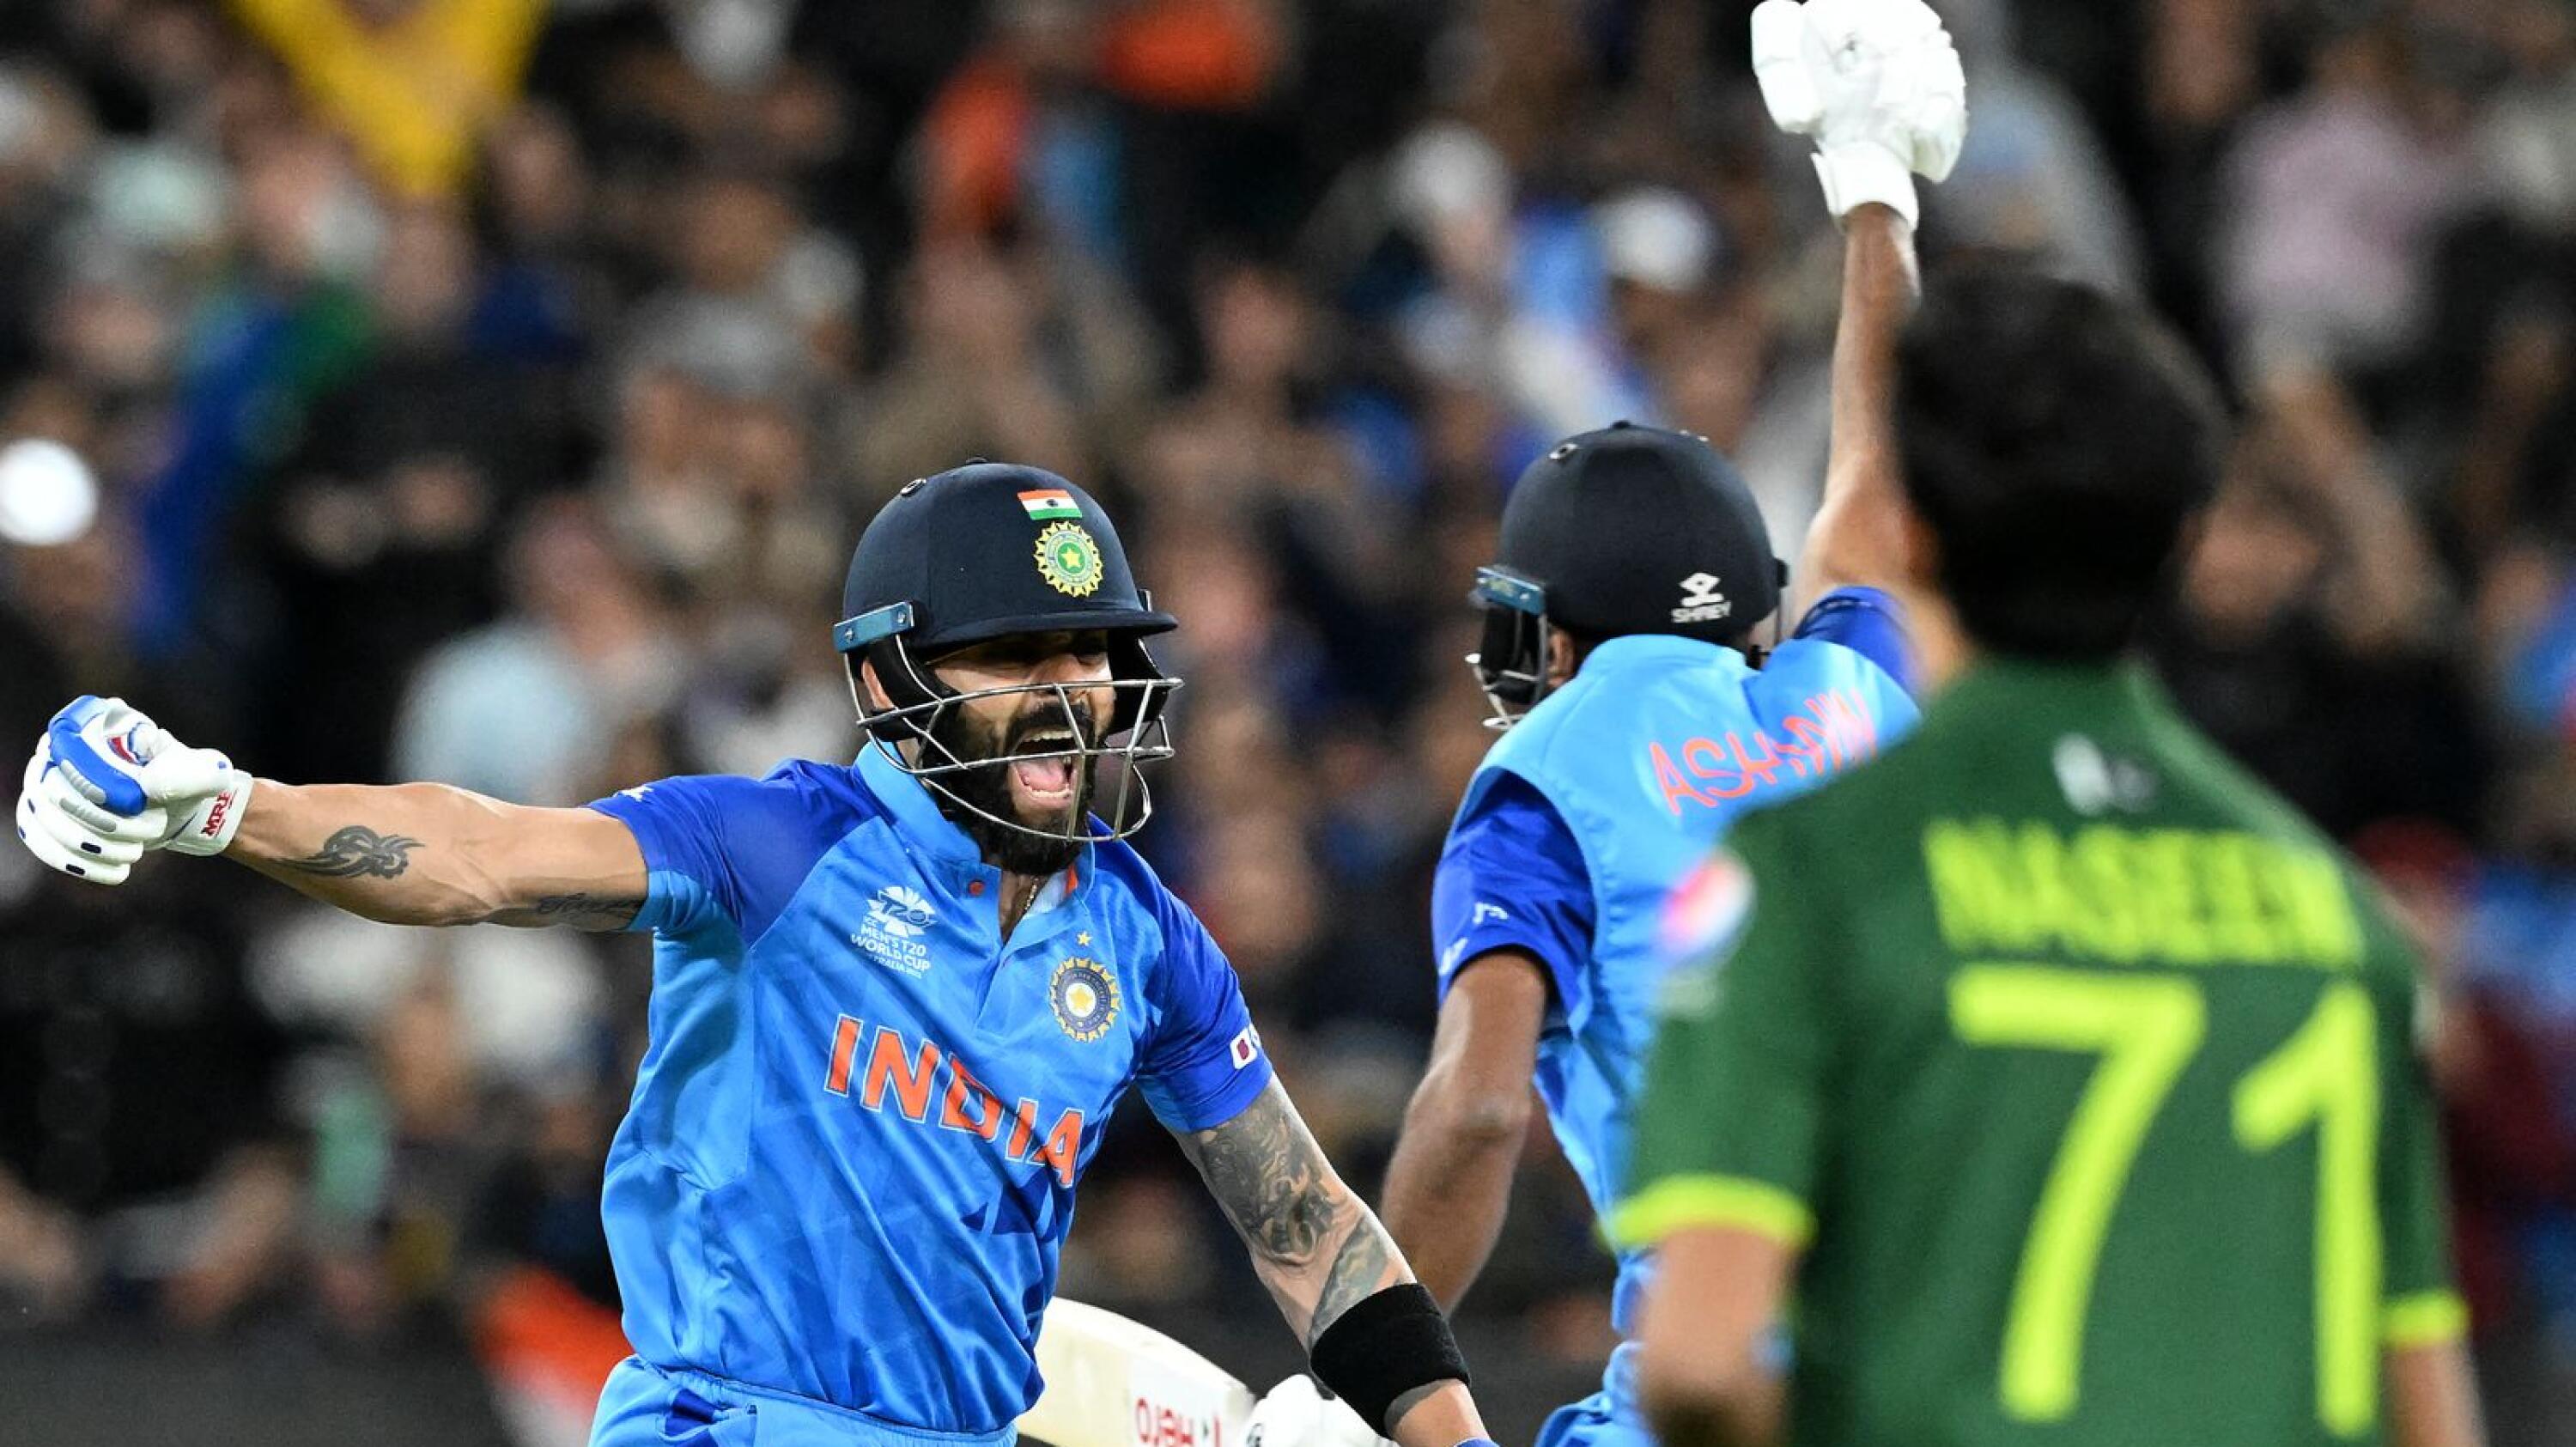 India's Virat Kohli celebrates with Ravichandran Ashwin after they secured their win over Pakistan in their T20 World Cup cricket match at Melbourne Cricket Ground in Melbourne on Sunday